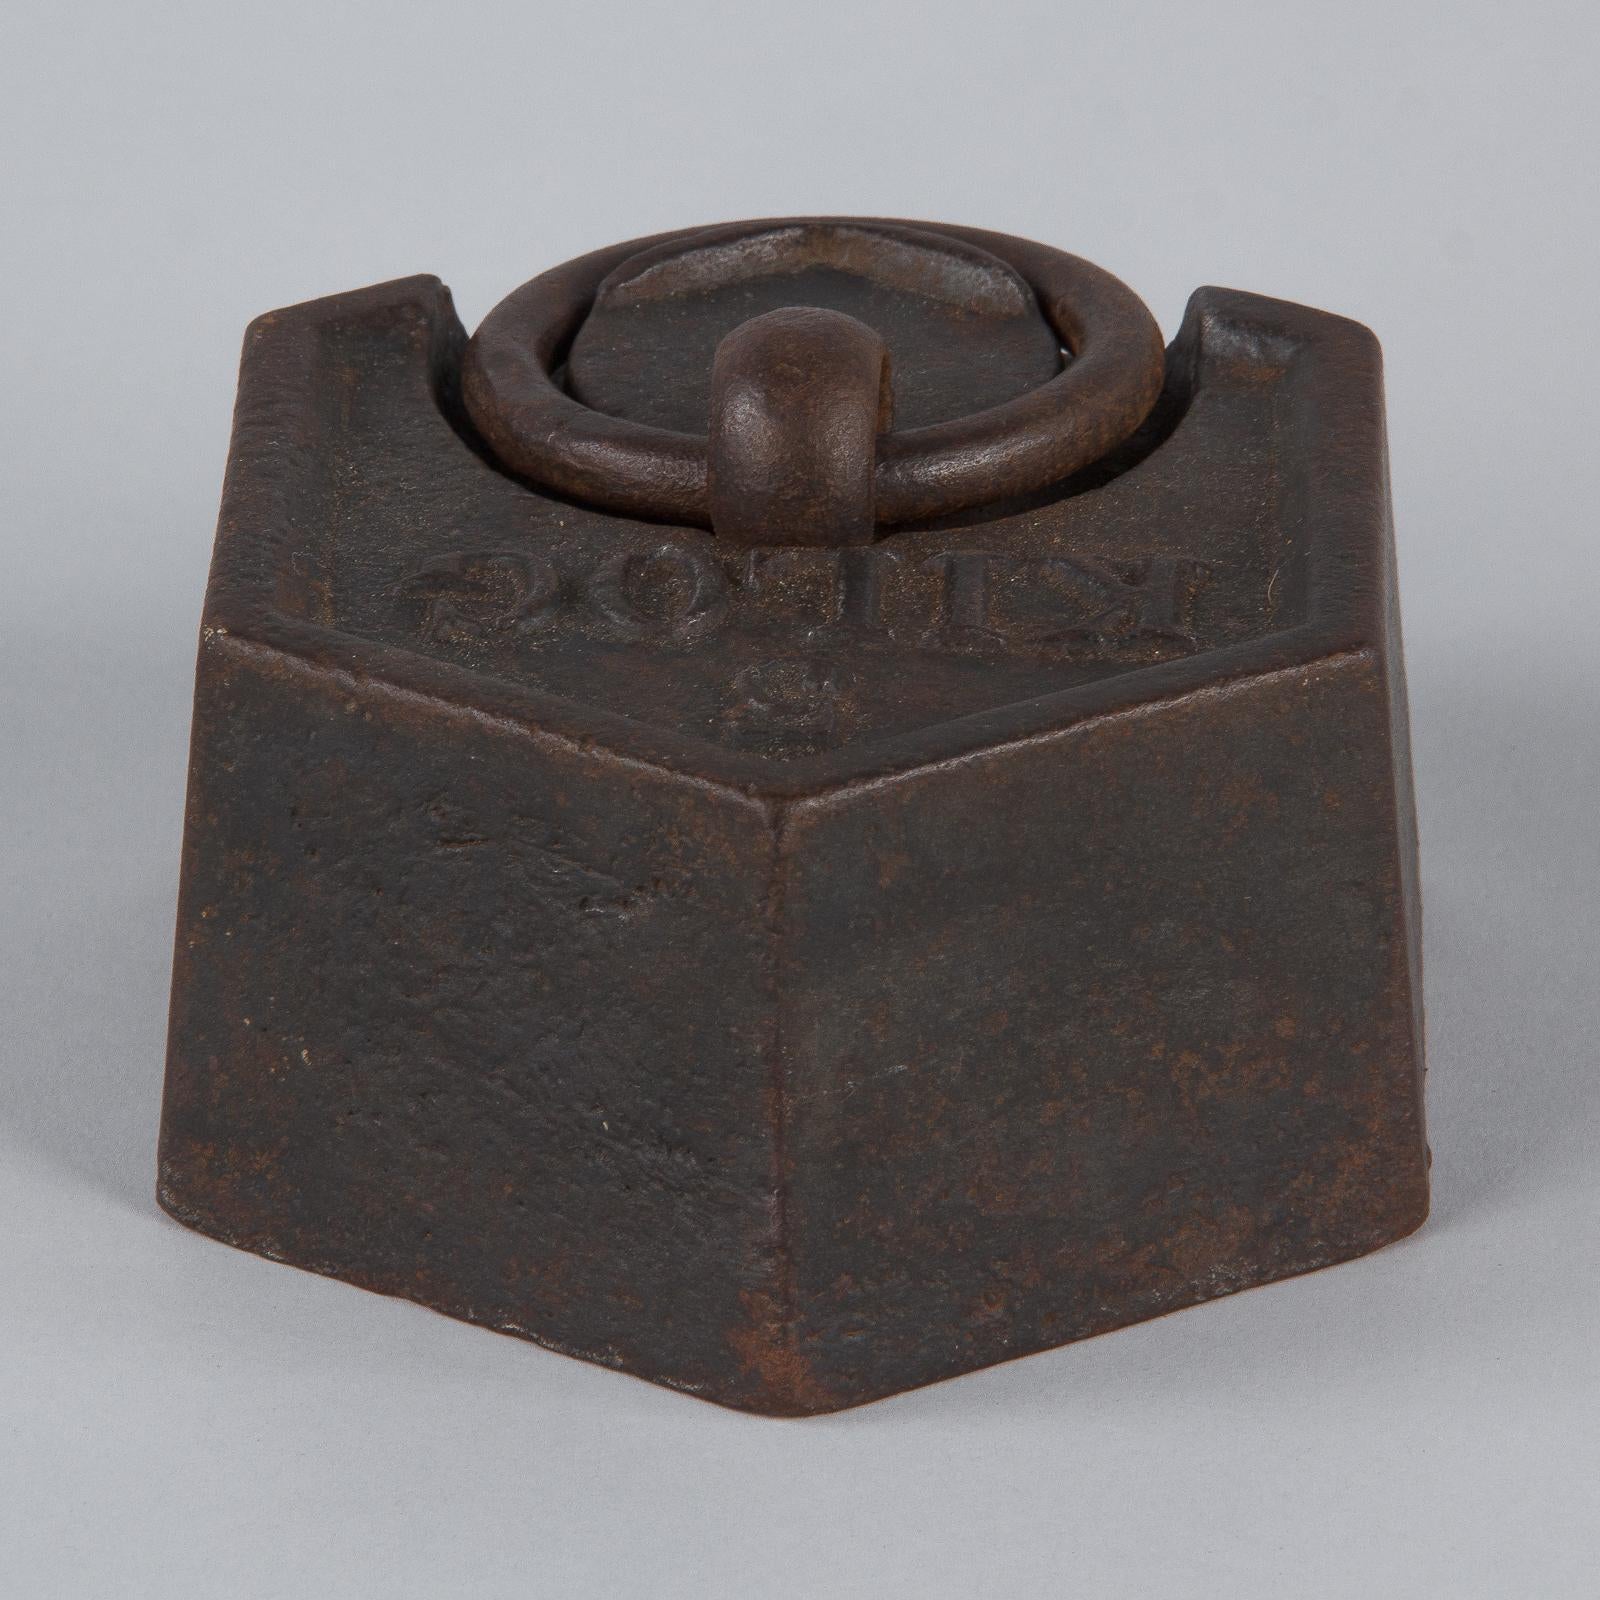 Five Kilogram Iron Scale Weight, France, Early 1900s 1